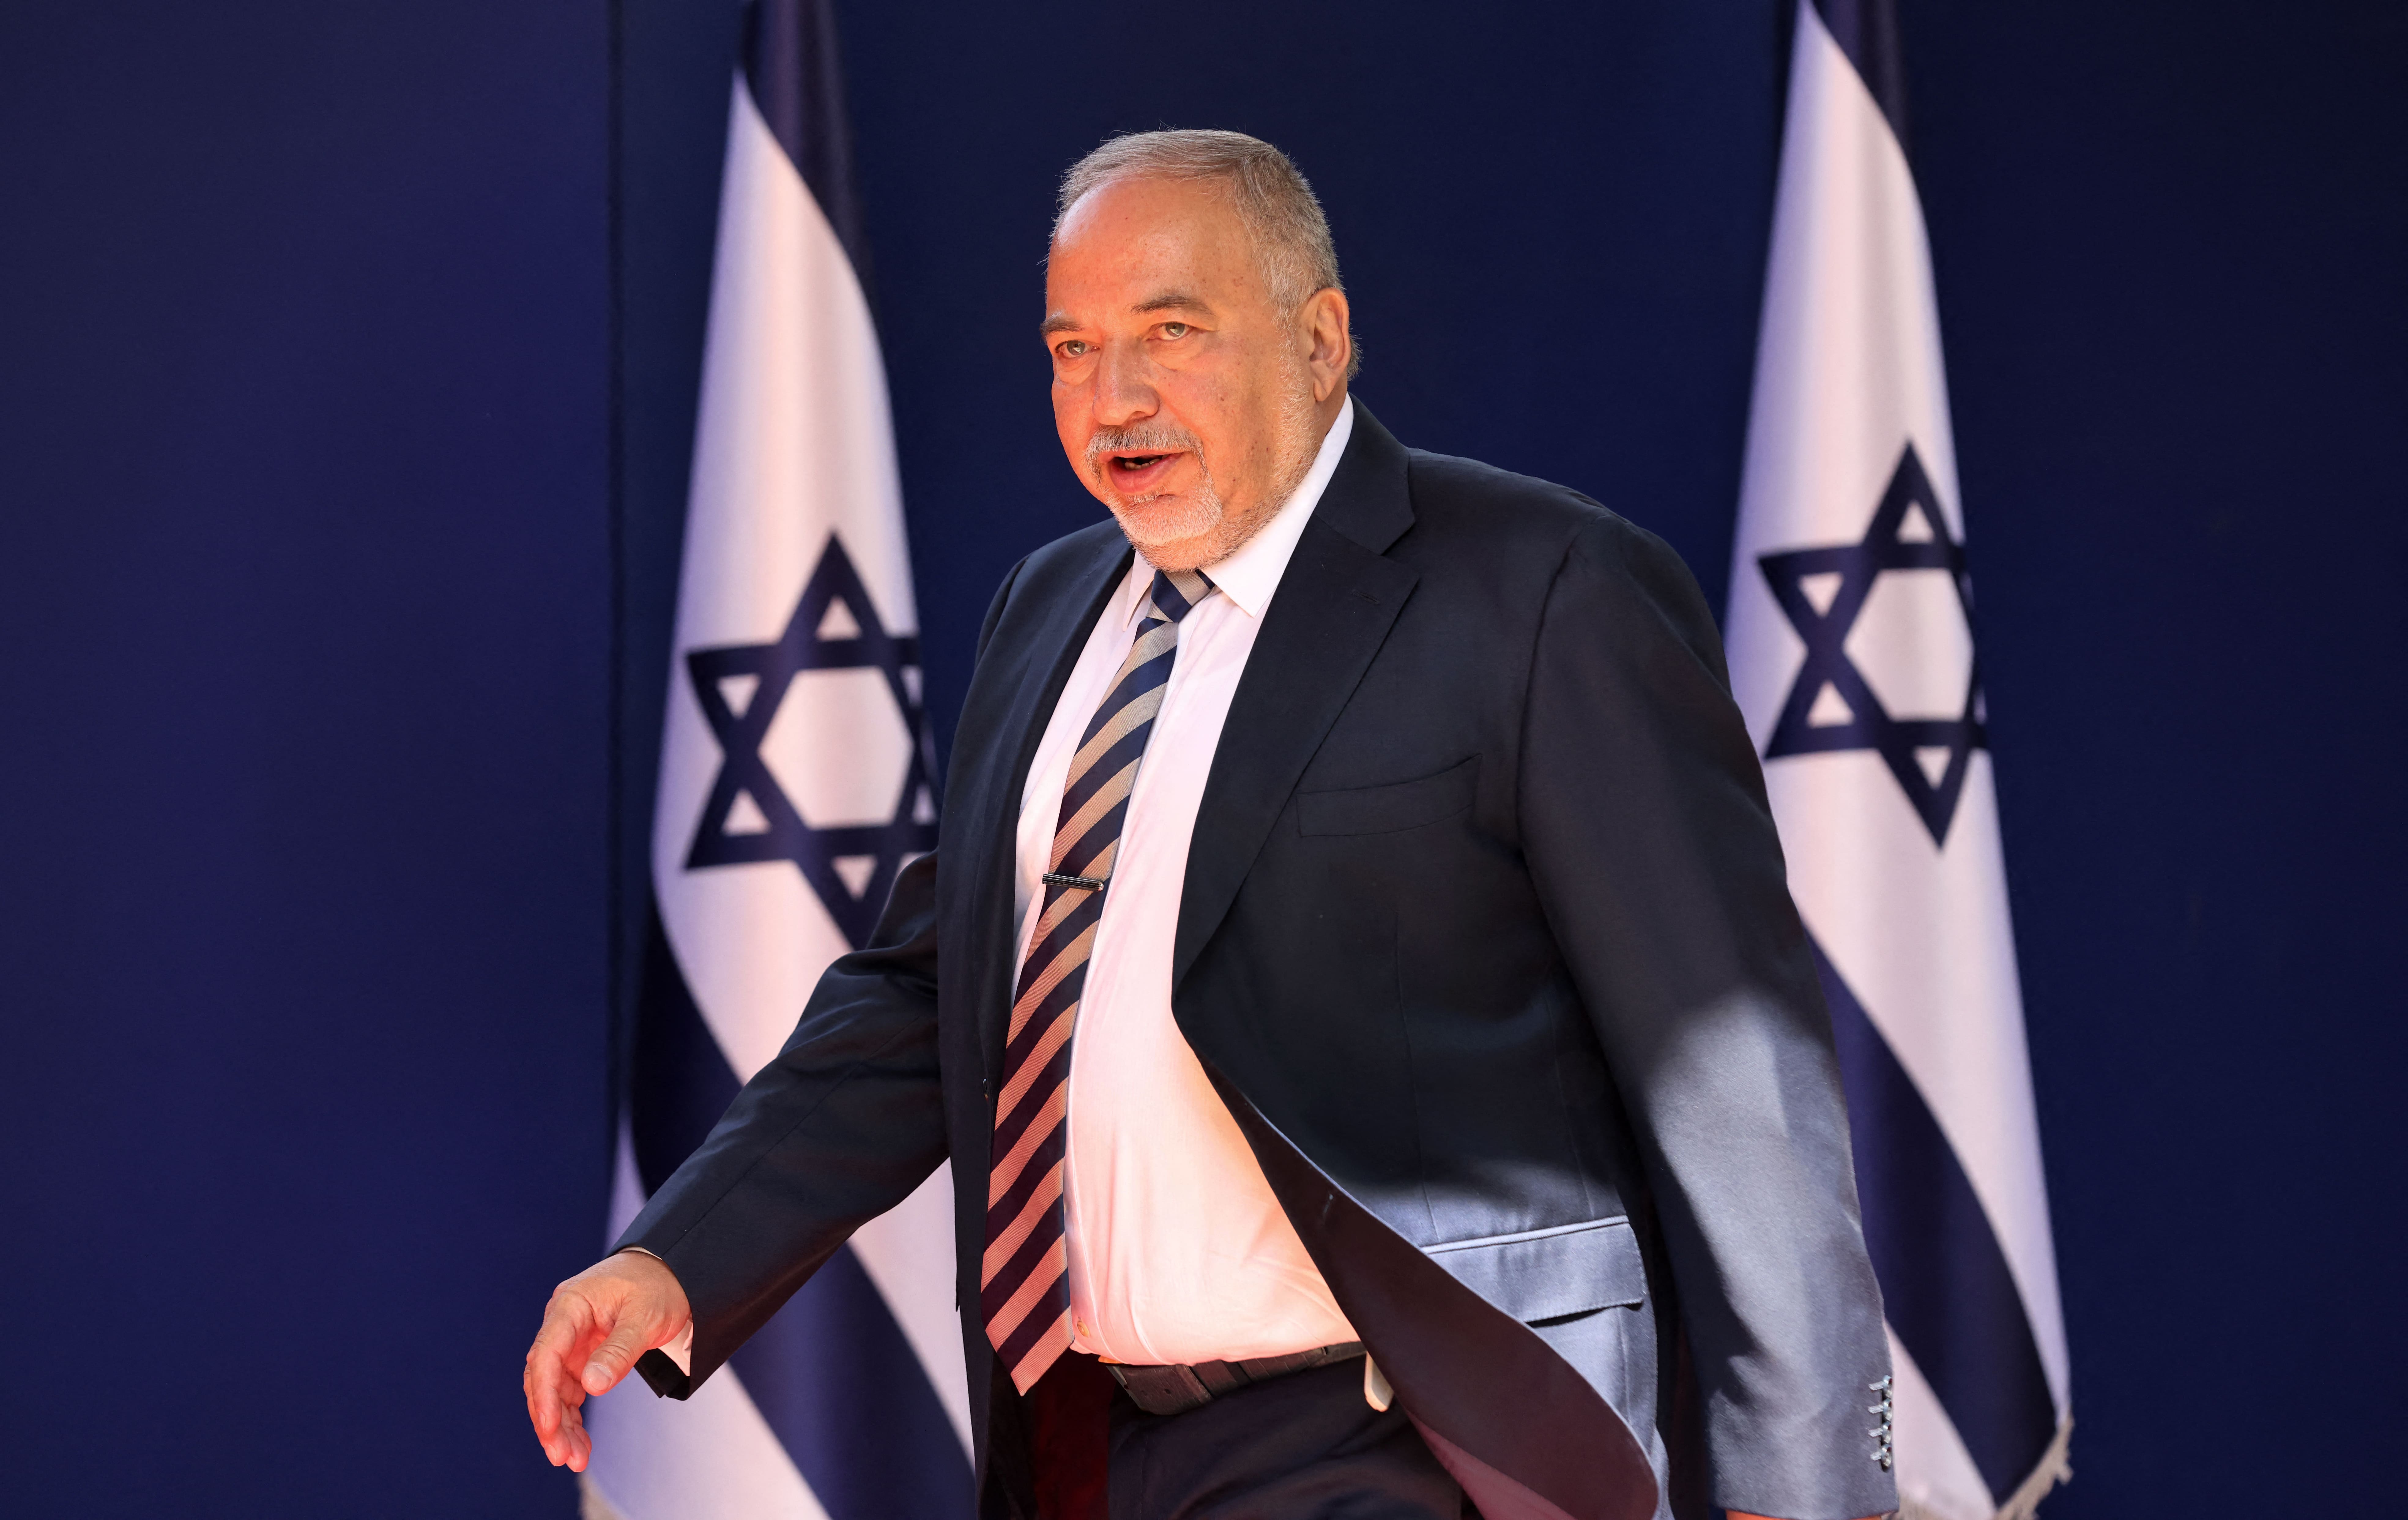 Avigdor Lieberman, Israel's right-wing secular nationalist who heads the Yisrael Beitenu party, arrives at the President's residence in Jerusalem for a picture, on 14 June, 2021, (AFP)